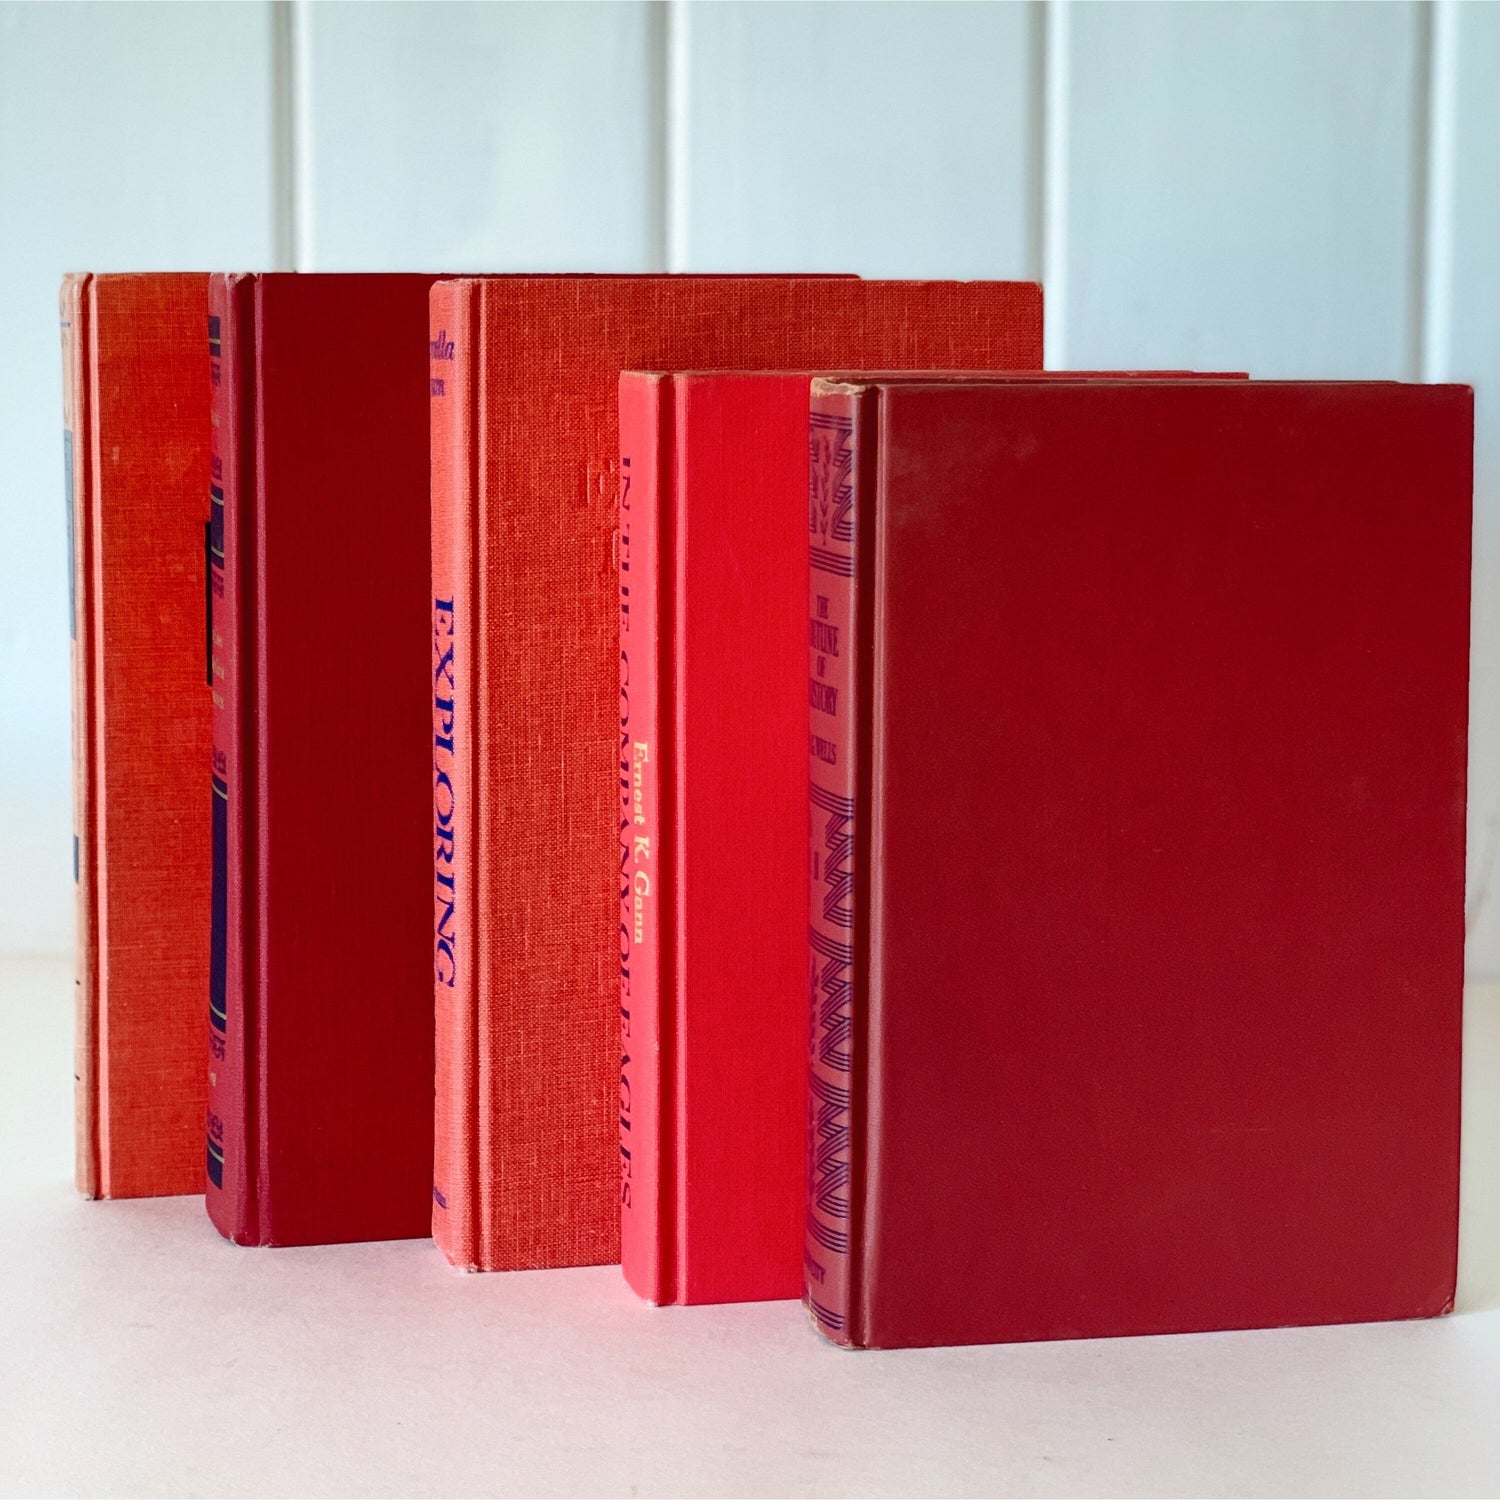 Red and Blue Vintage Book Set, Books By Color, Retro Mid Century Shelf Styling